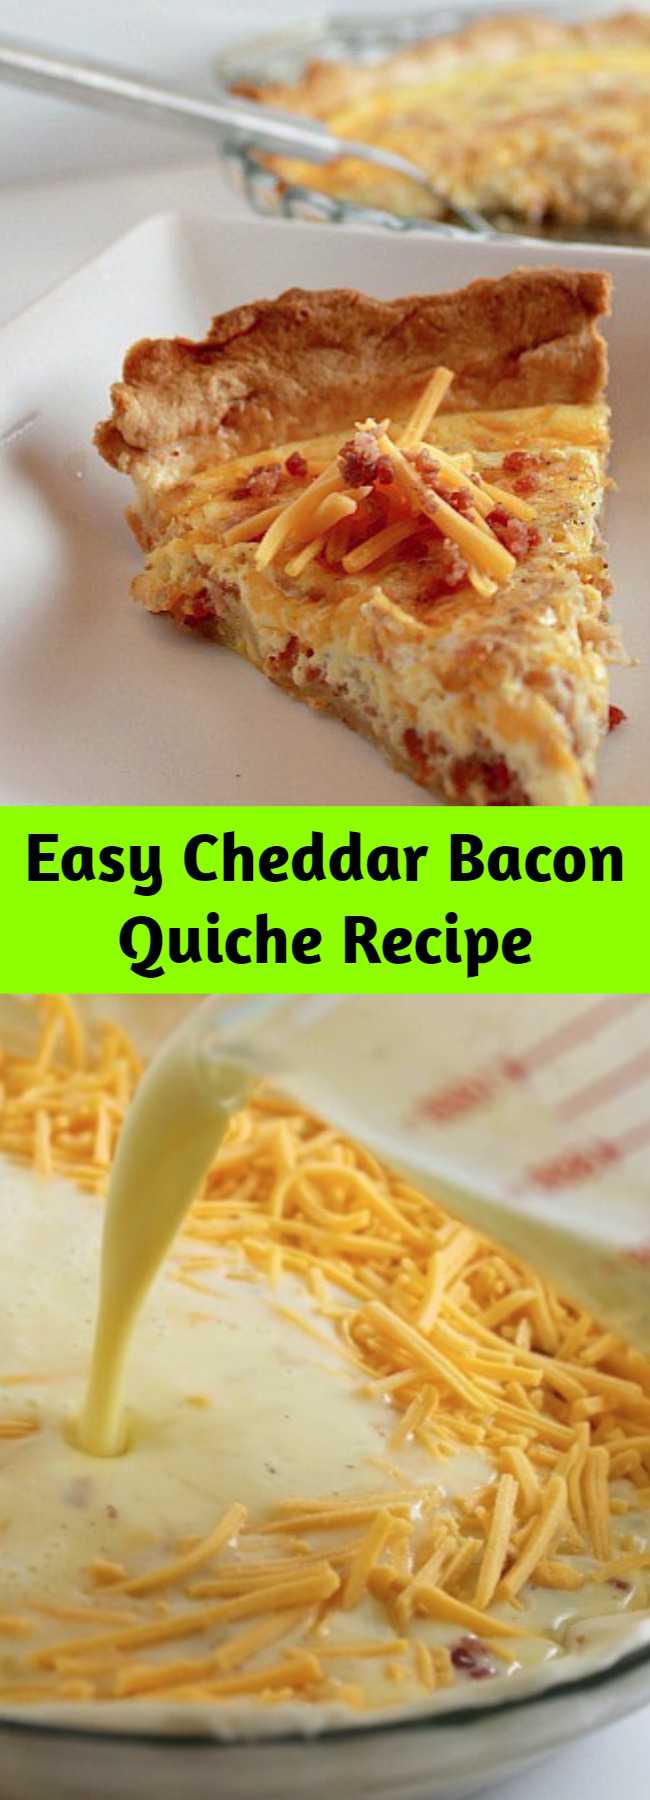 Easy Cheddar Bacon Quiche Recipe - This Cheddar Bacon Quiche recipe comes together quickly. It's very flexible allowing you to use what ever ingredients you have on hand.